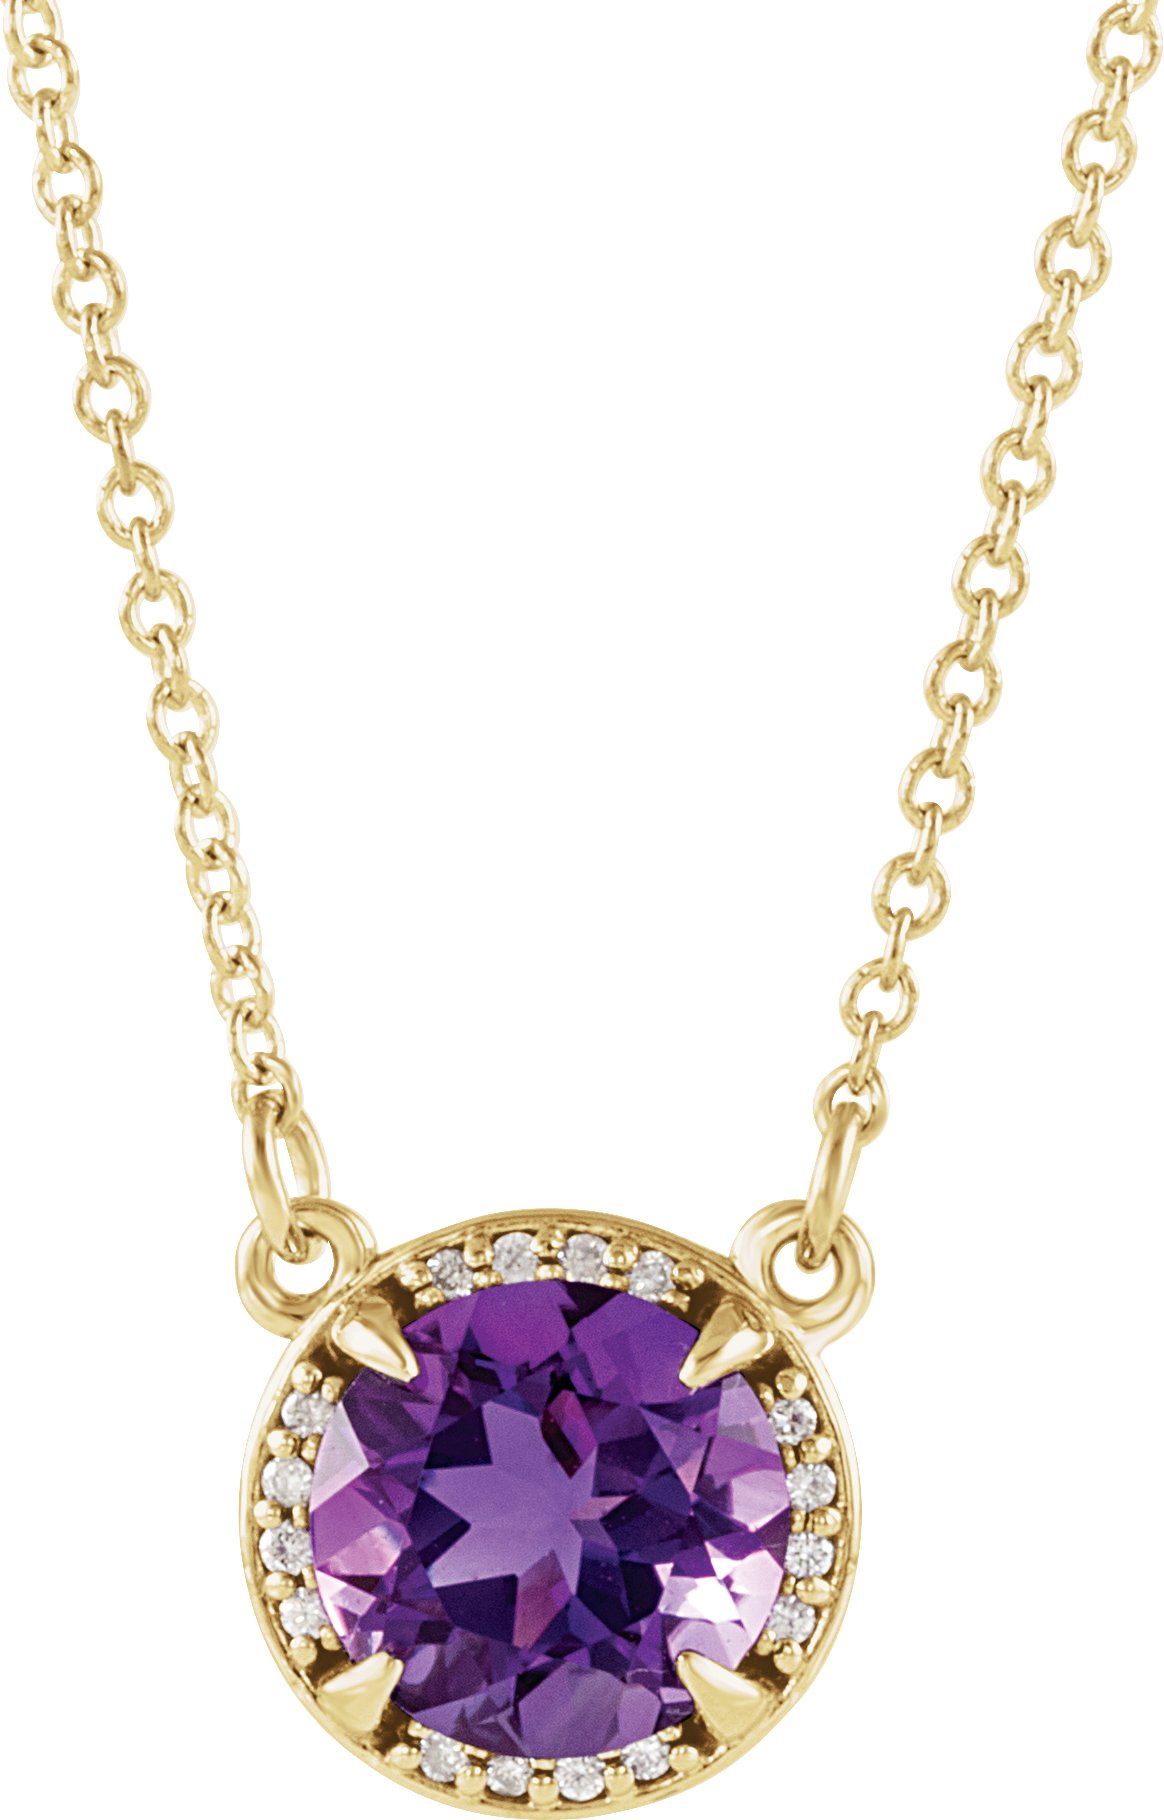 14K Yellow 8 mm Round Amethyst and .05 CTW Diamond 16 inch Necklace Ref 9894170